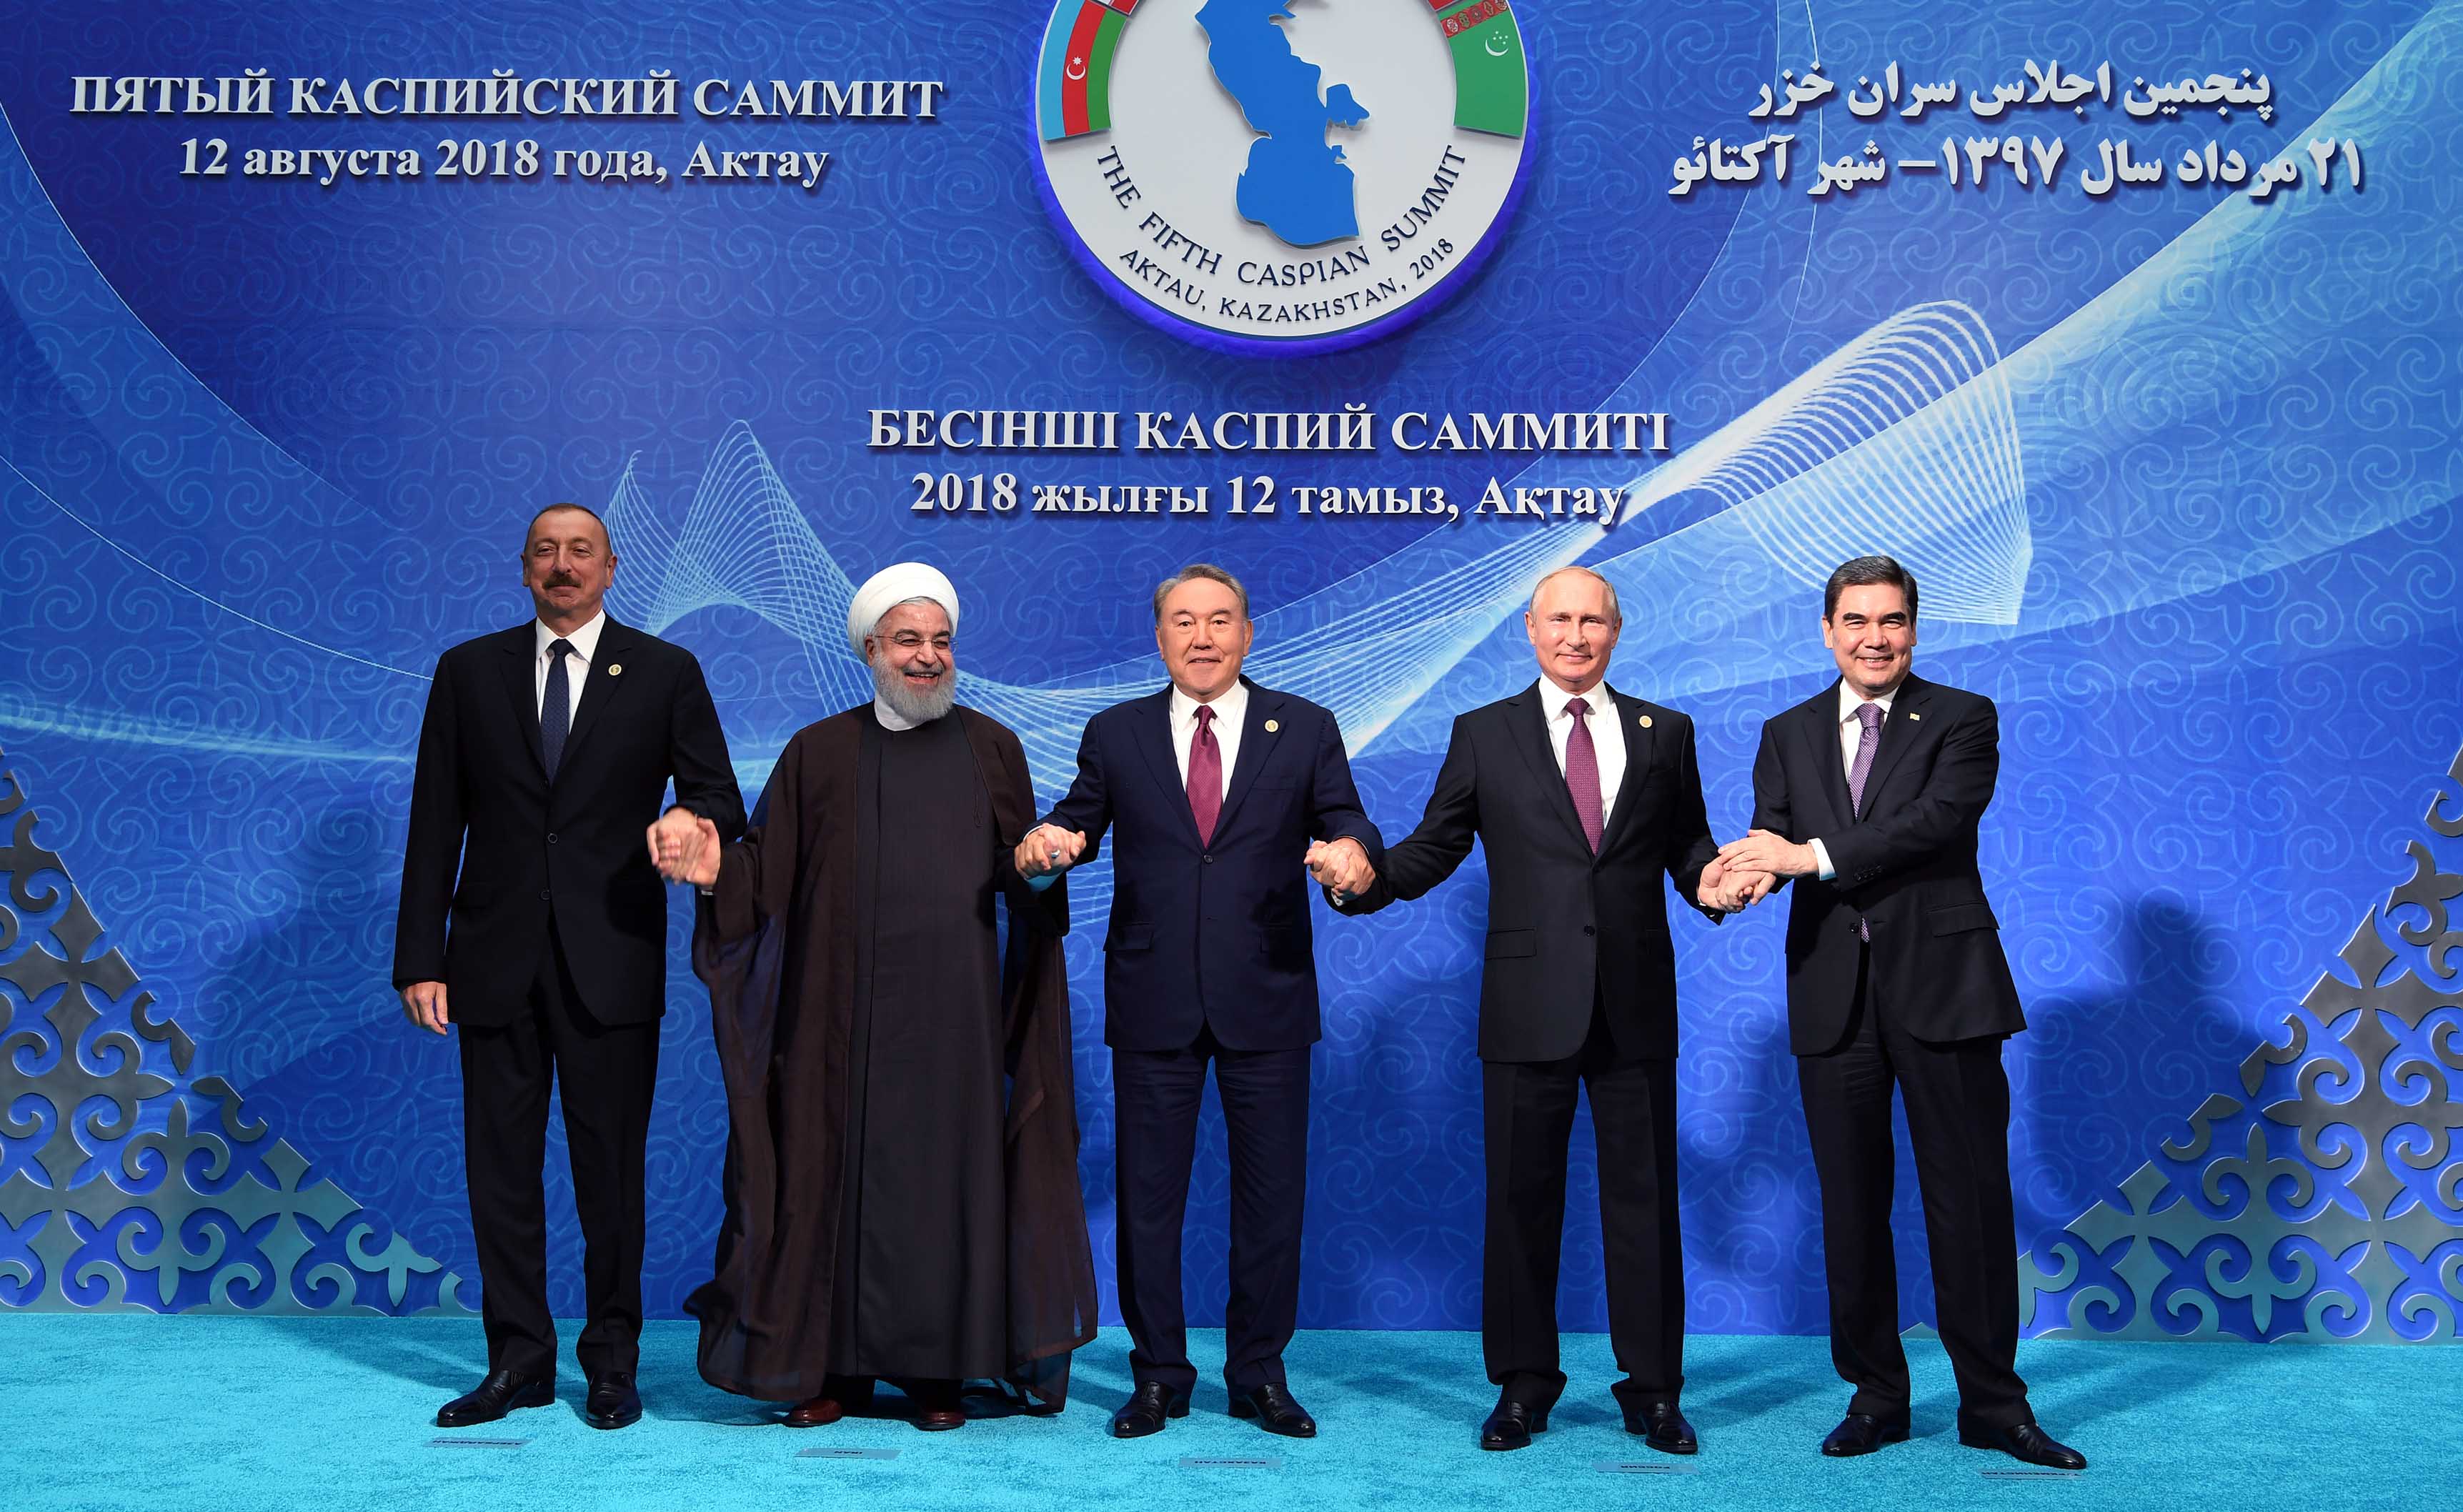 Kazakh President participates in the plenary session of the Fifth Caspian Summit